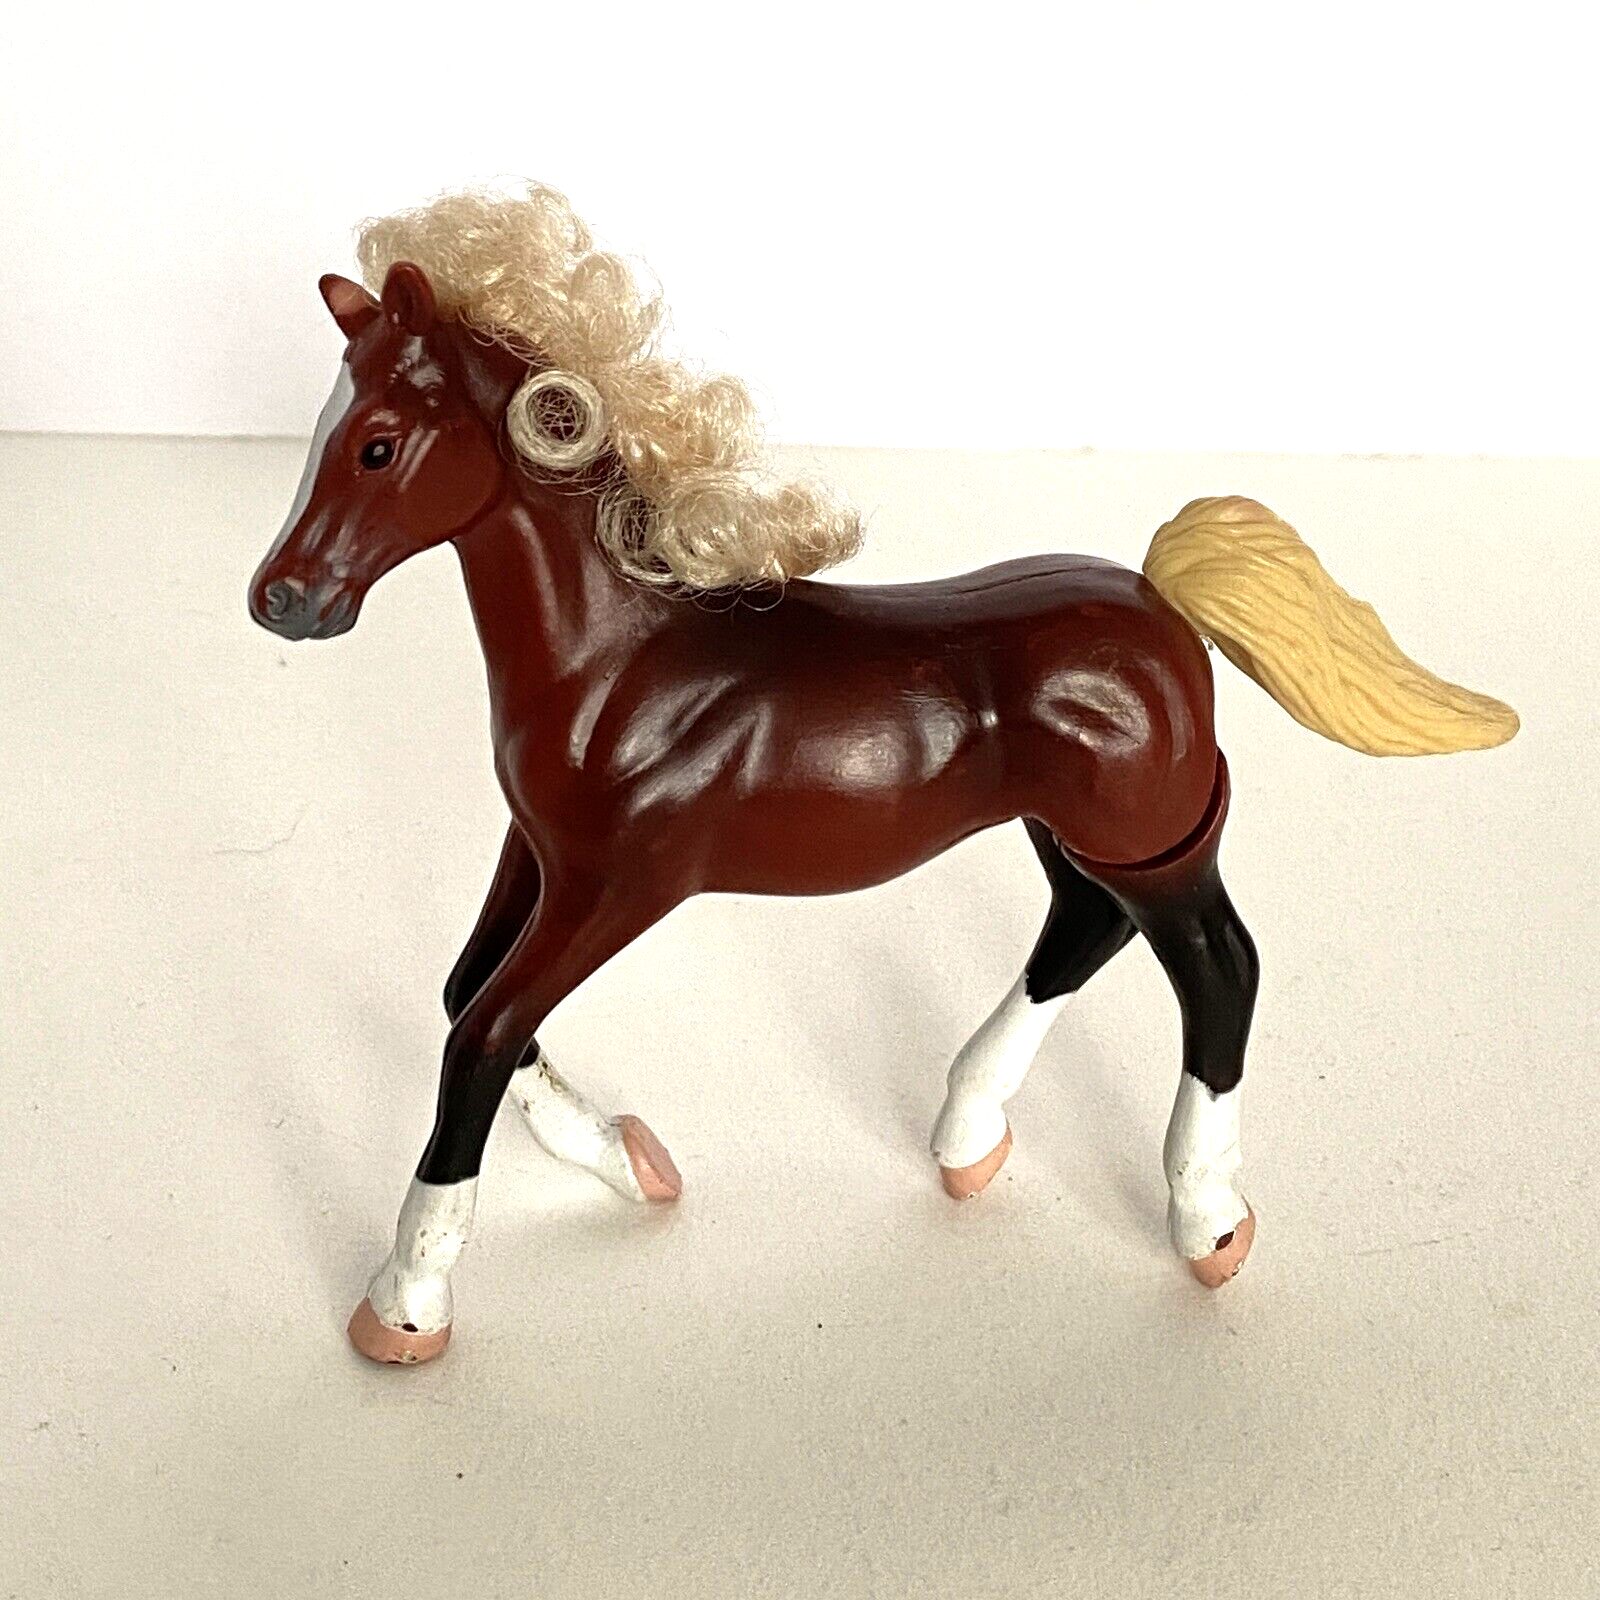 Primary image for 1997 Empire Grand Champions Horse Figurine Moveable Rear Legs Tail Curly Mane